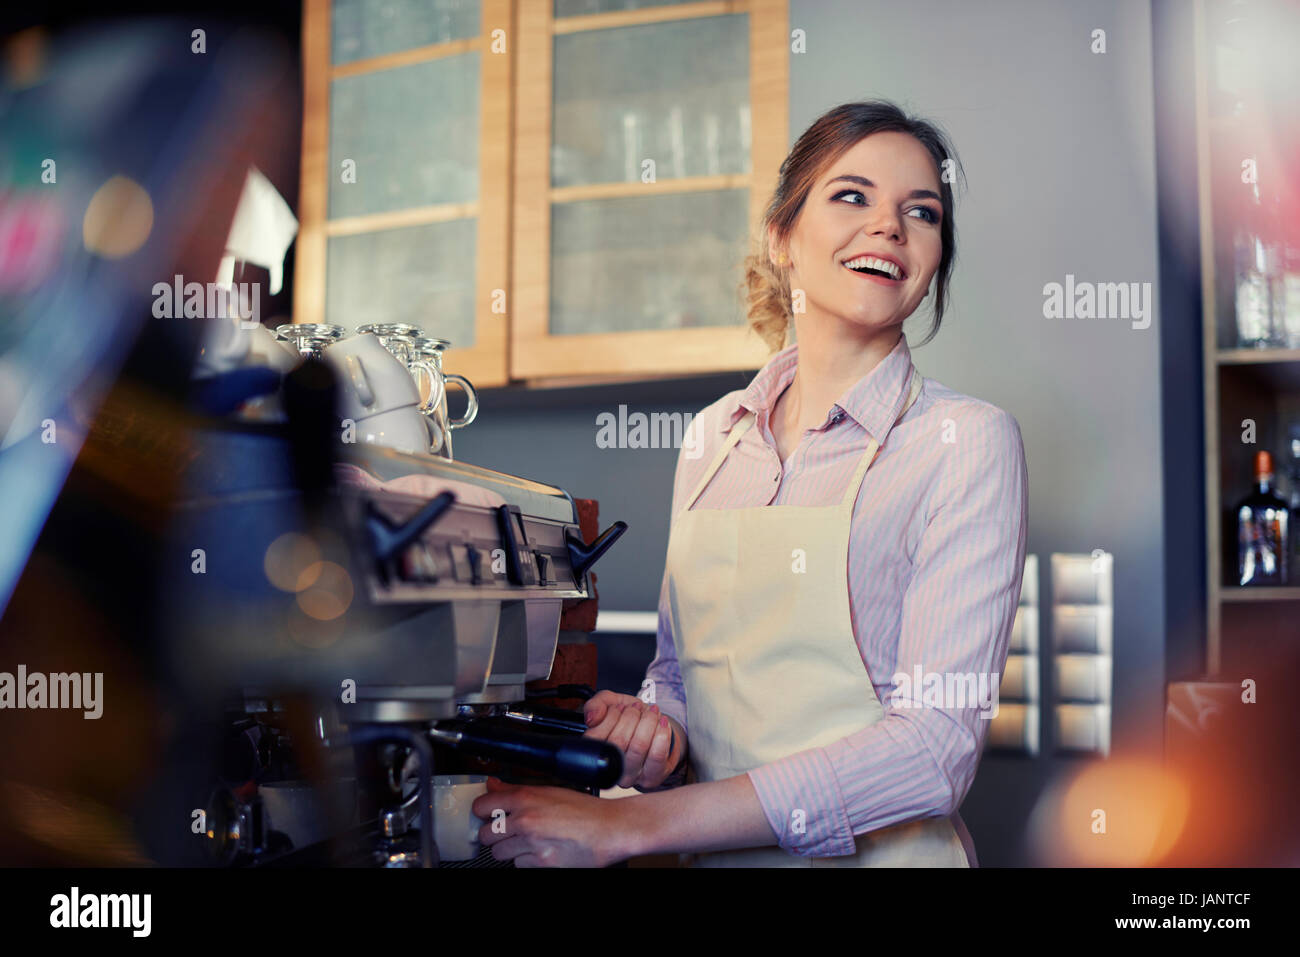 Female barista using coffee maker in cafe Stock Photo